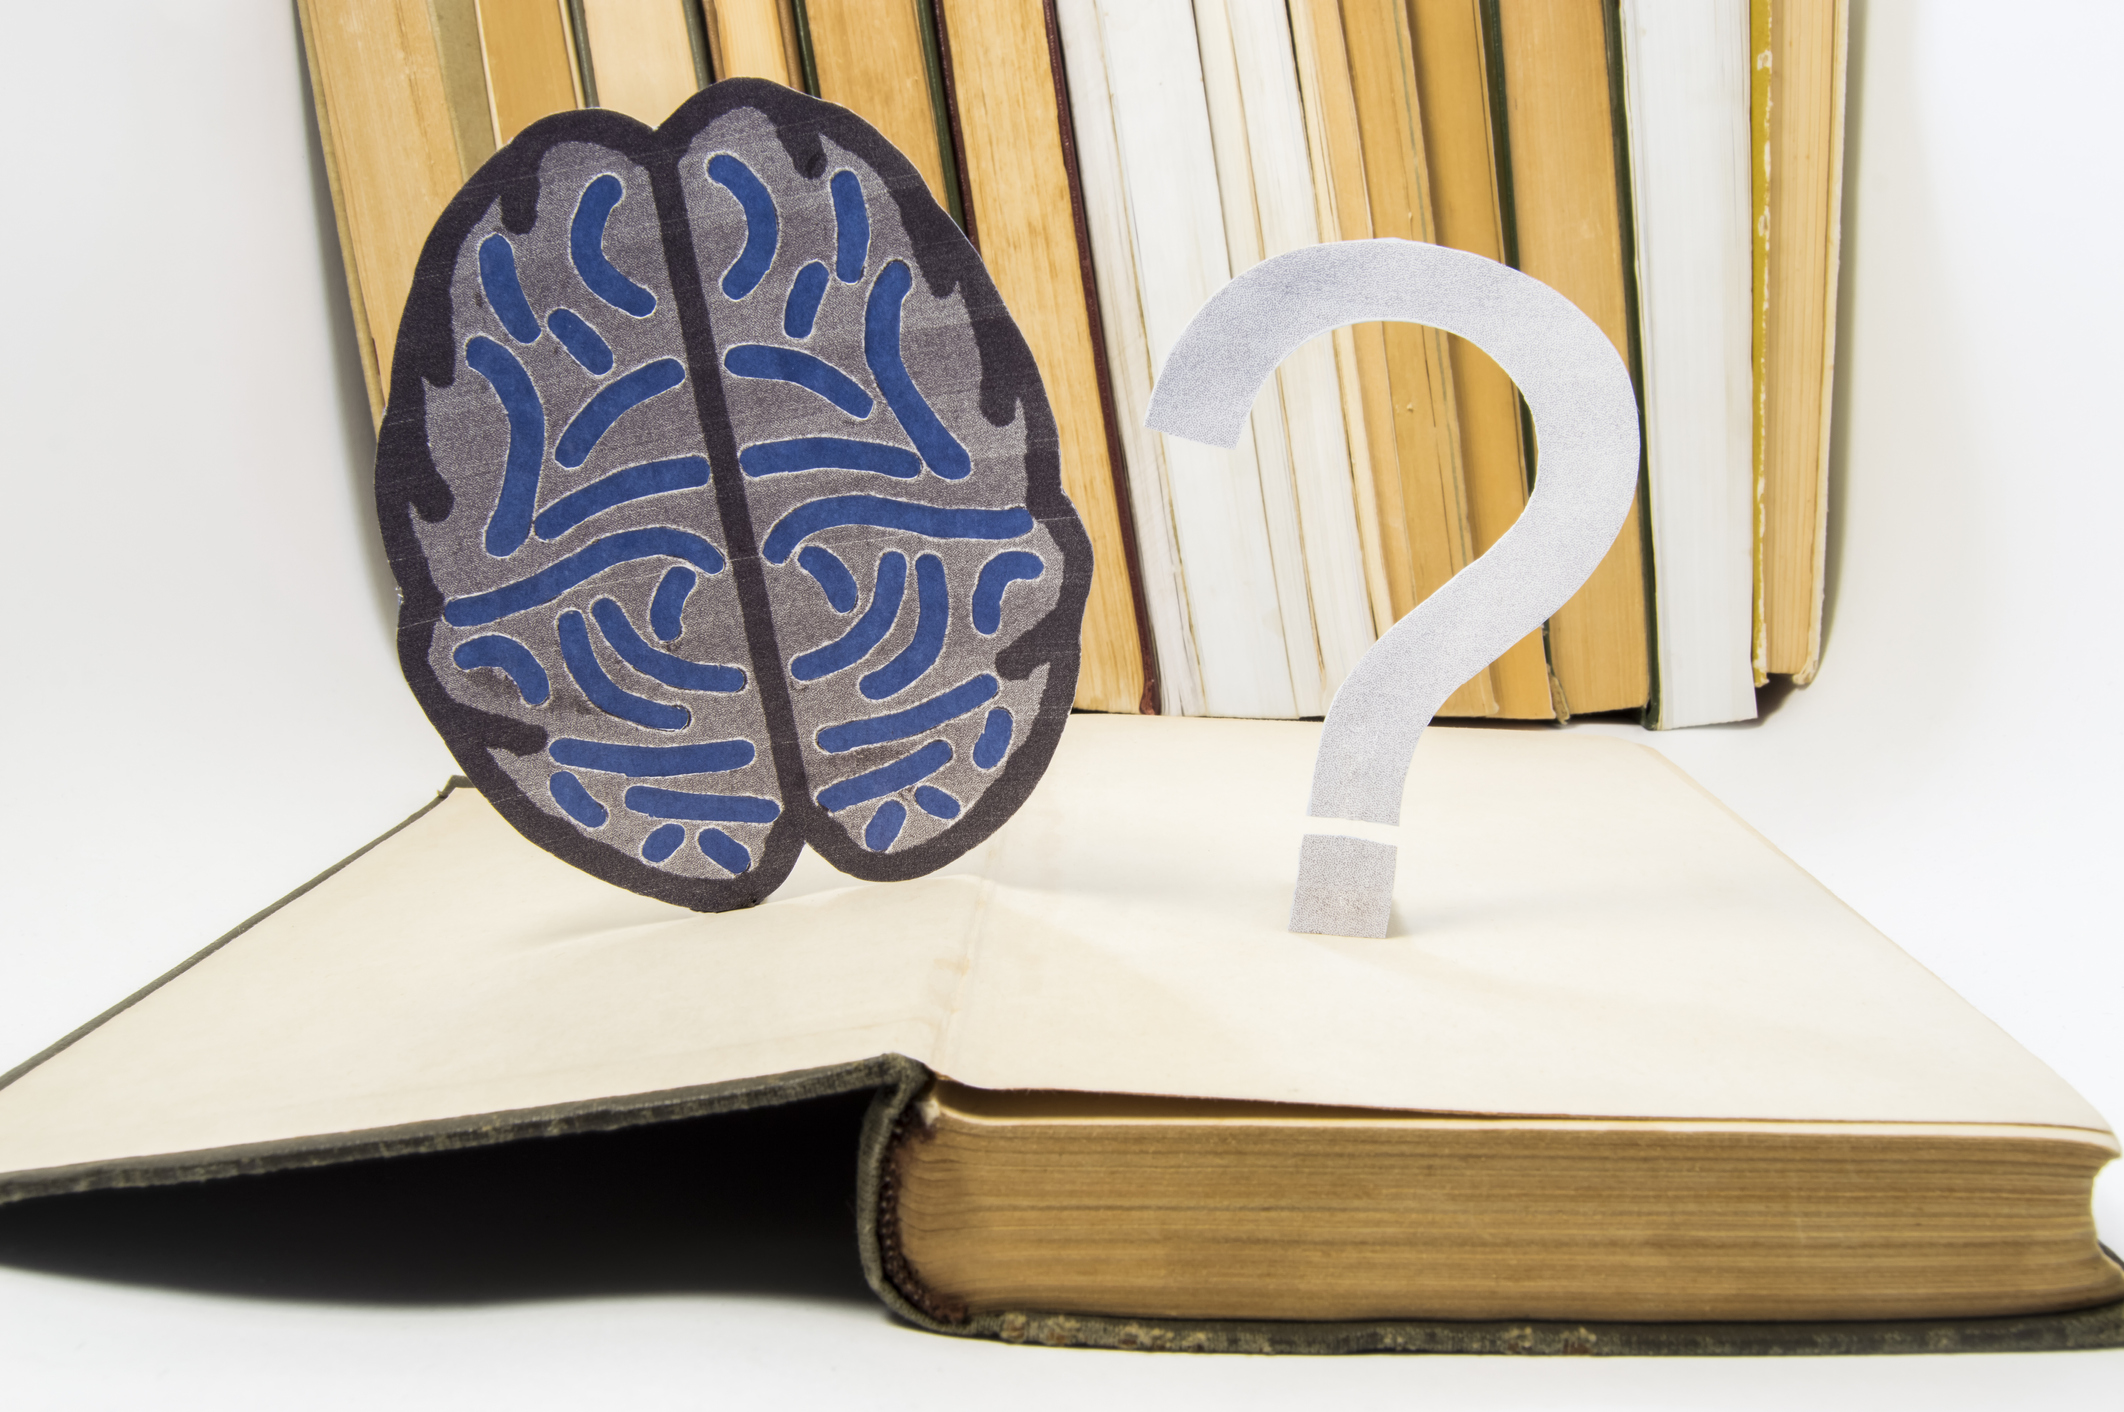 Paper brain silhouette and question mark is over old open medical book. Photo to refer issues and questions in study of brain, as well as difficulties in diagnosis in neurology and neuroscience